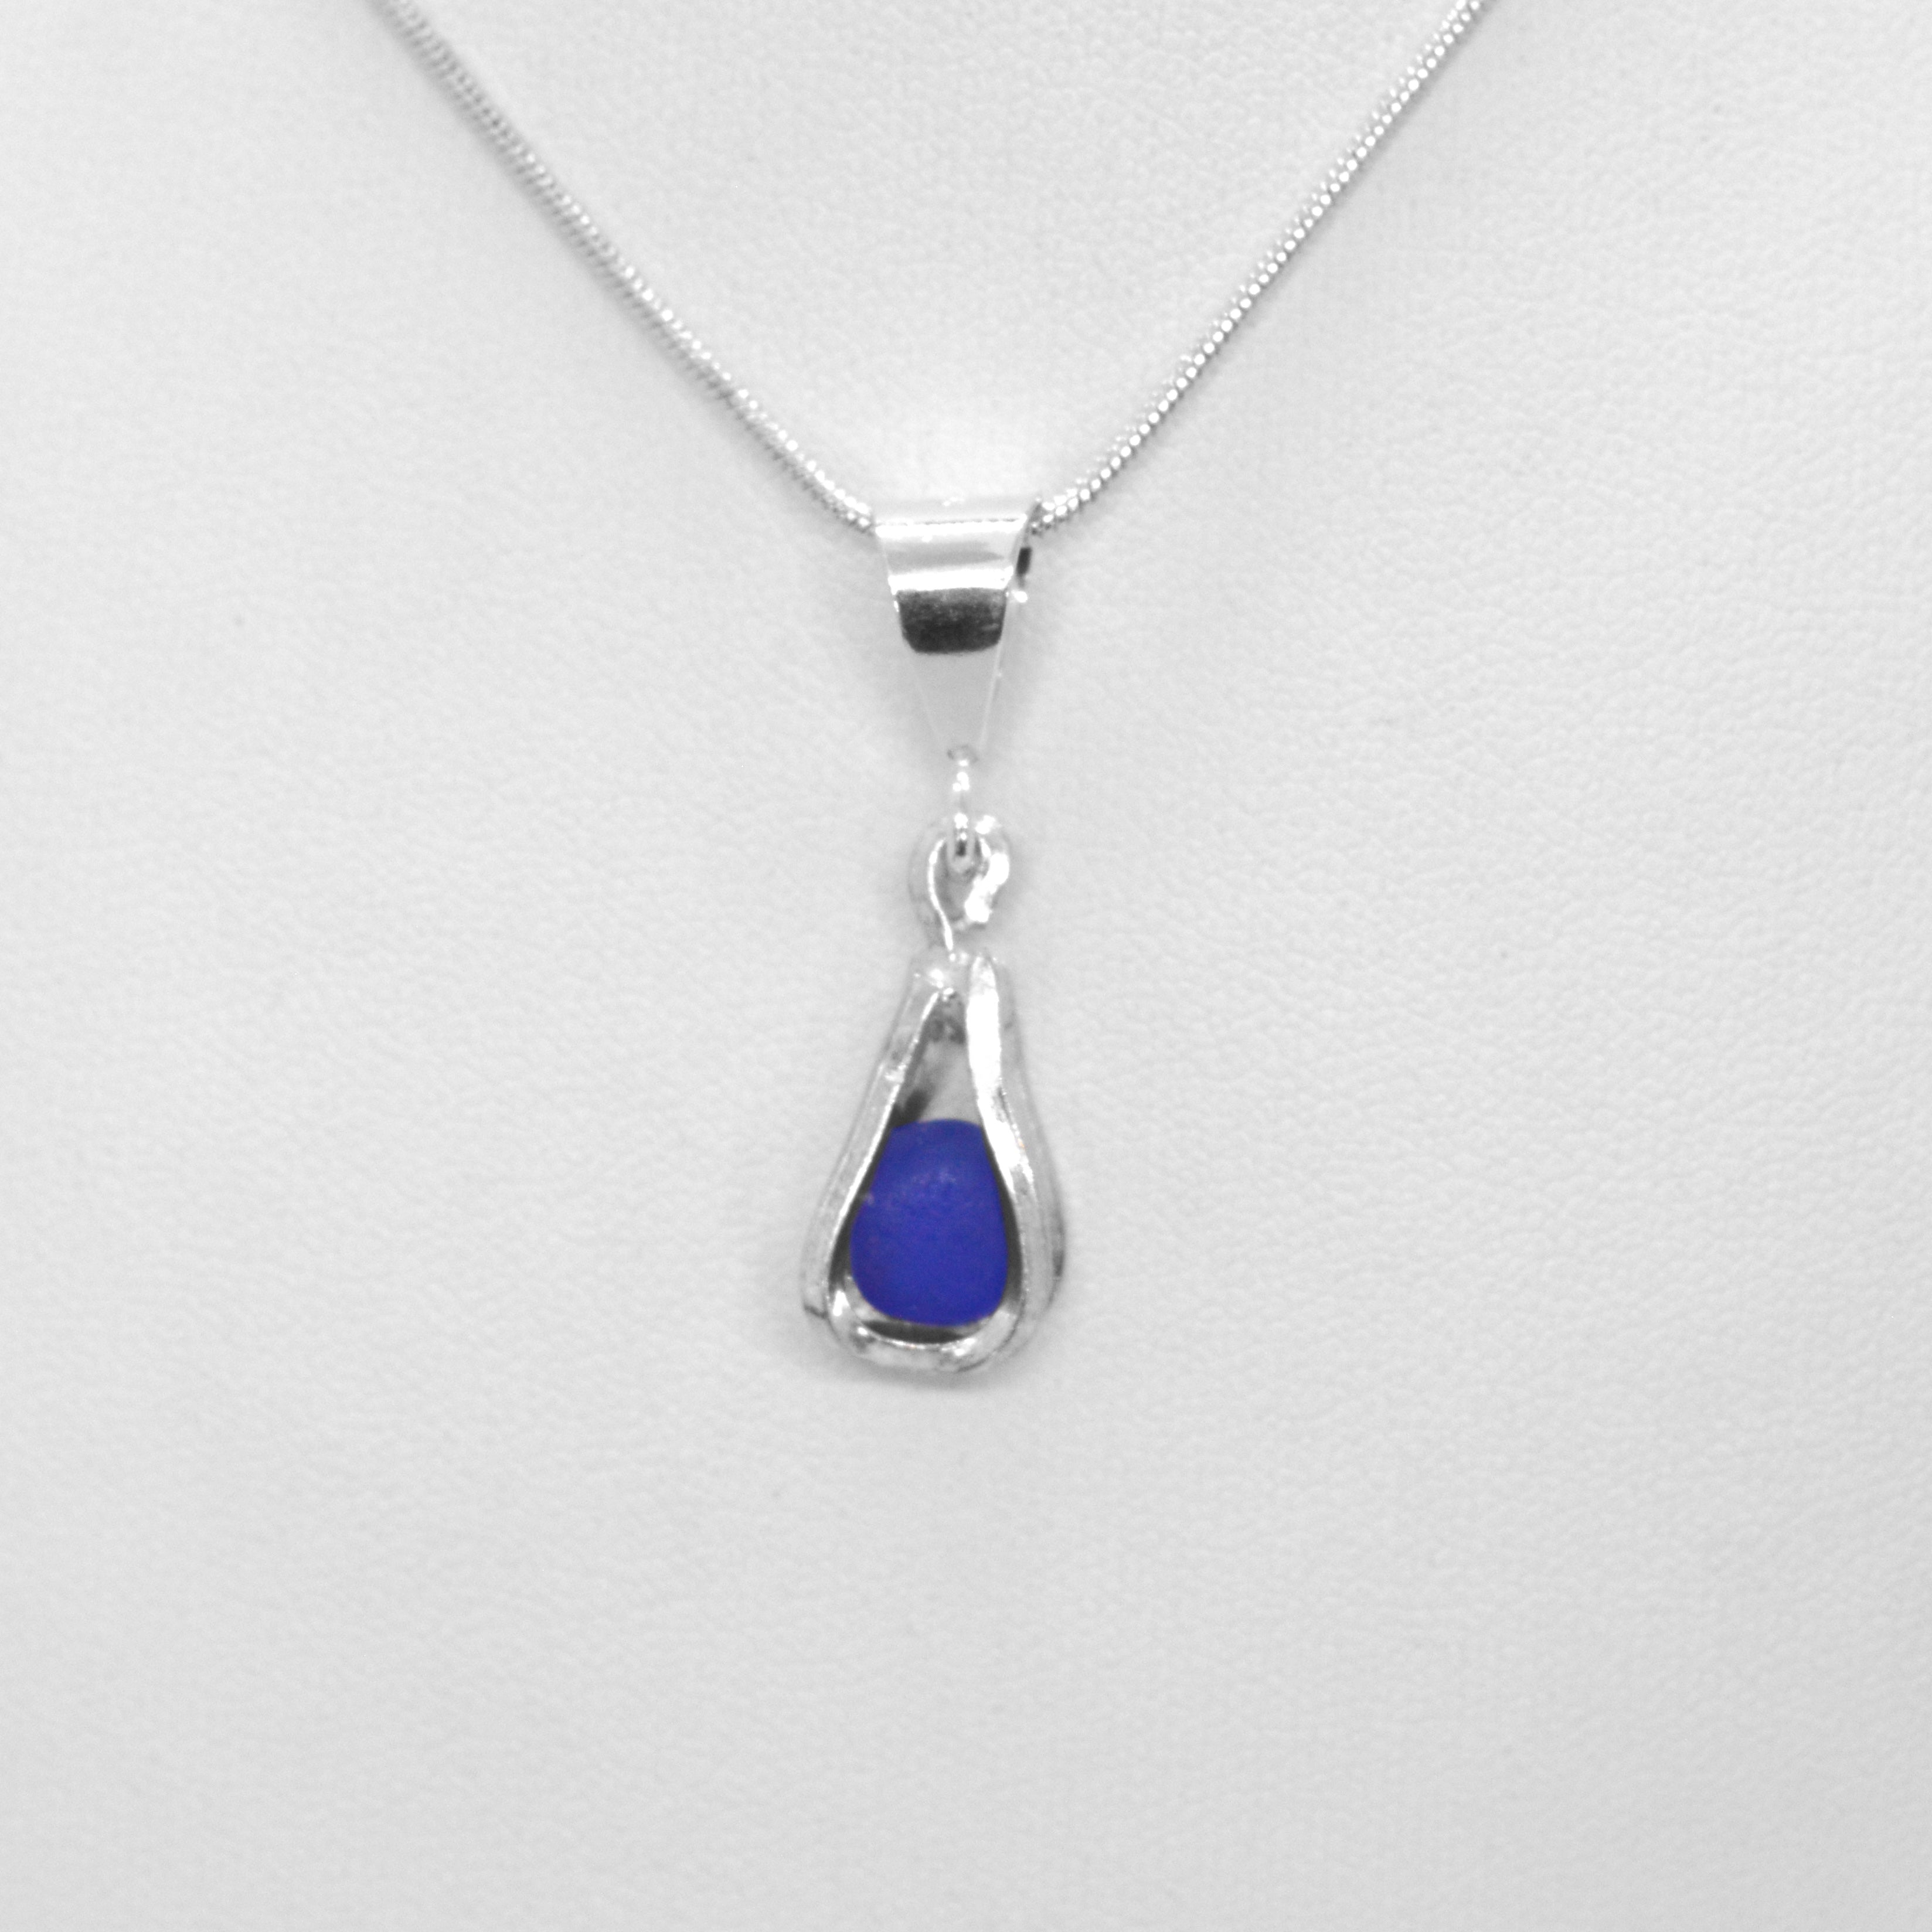 Small Blue Seaglass Sterling Silver Basket Pendant